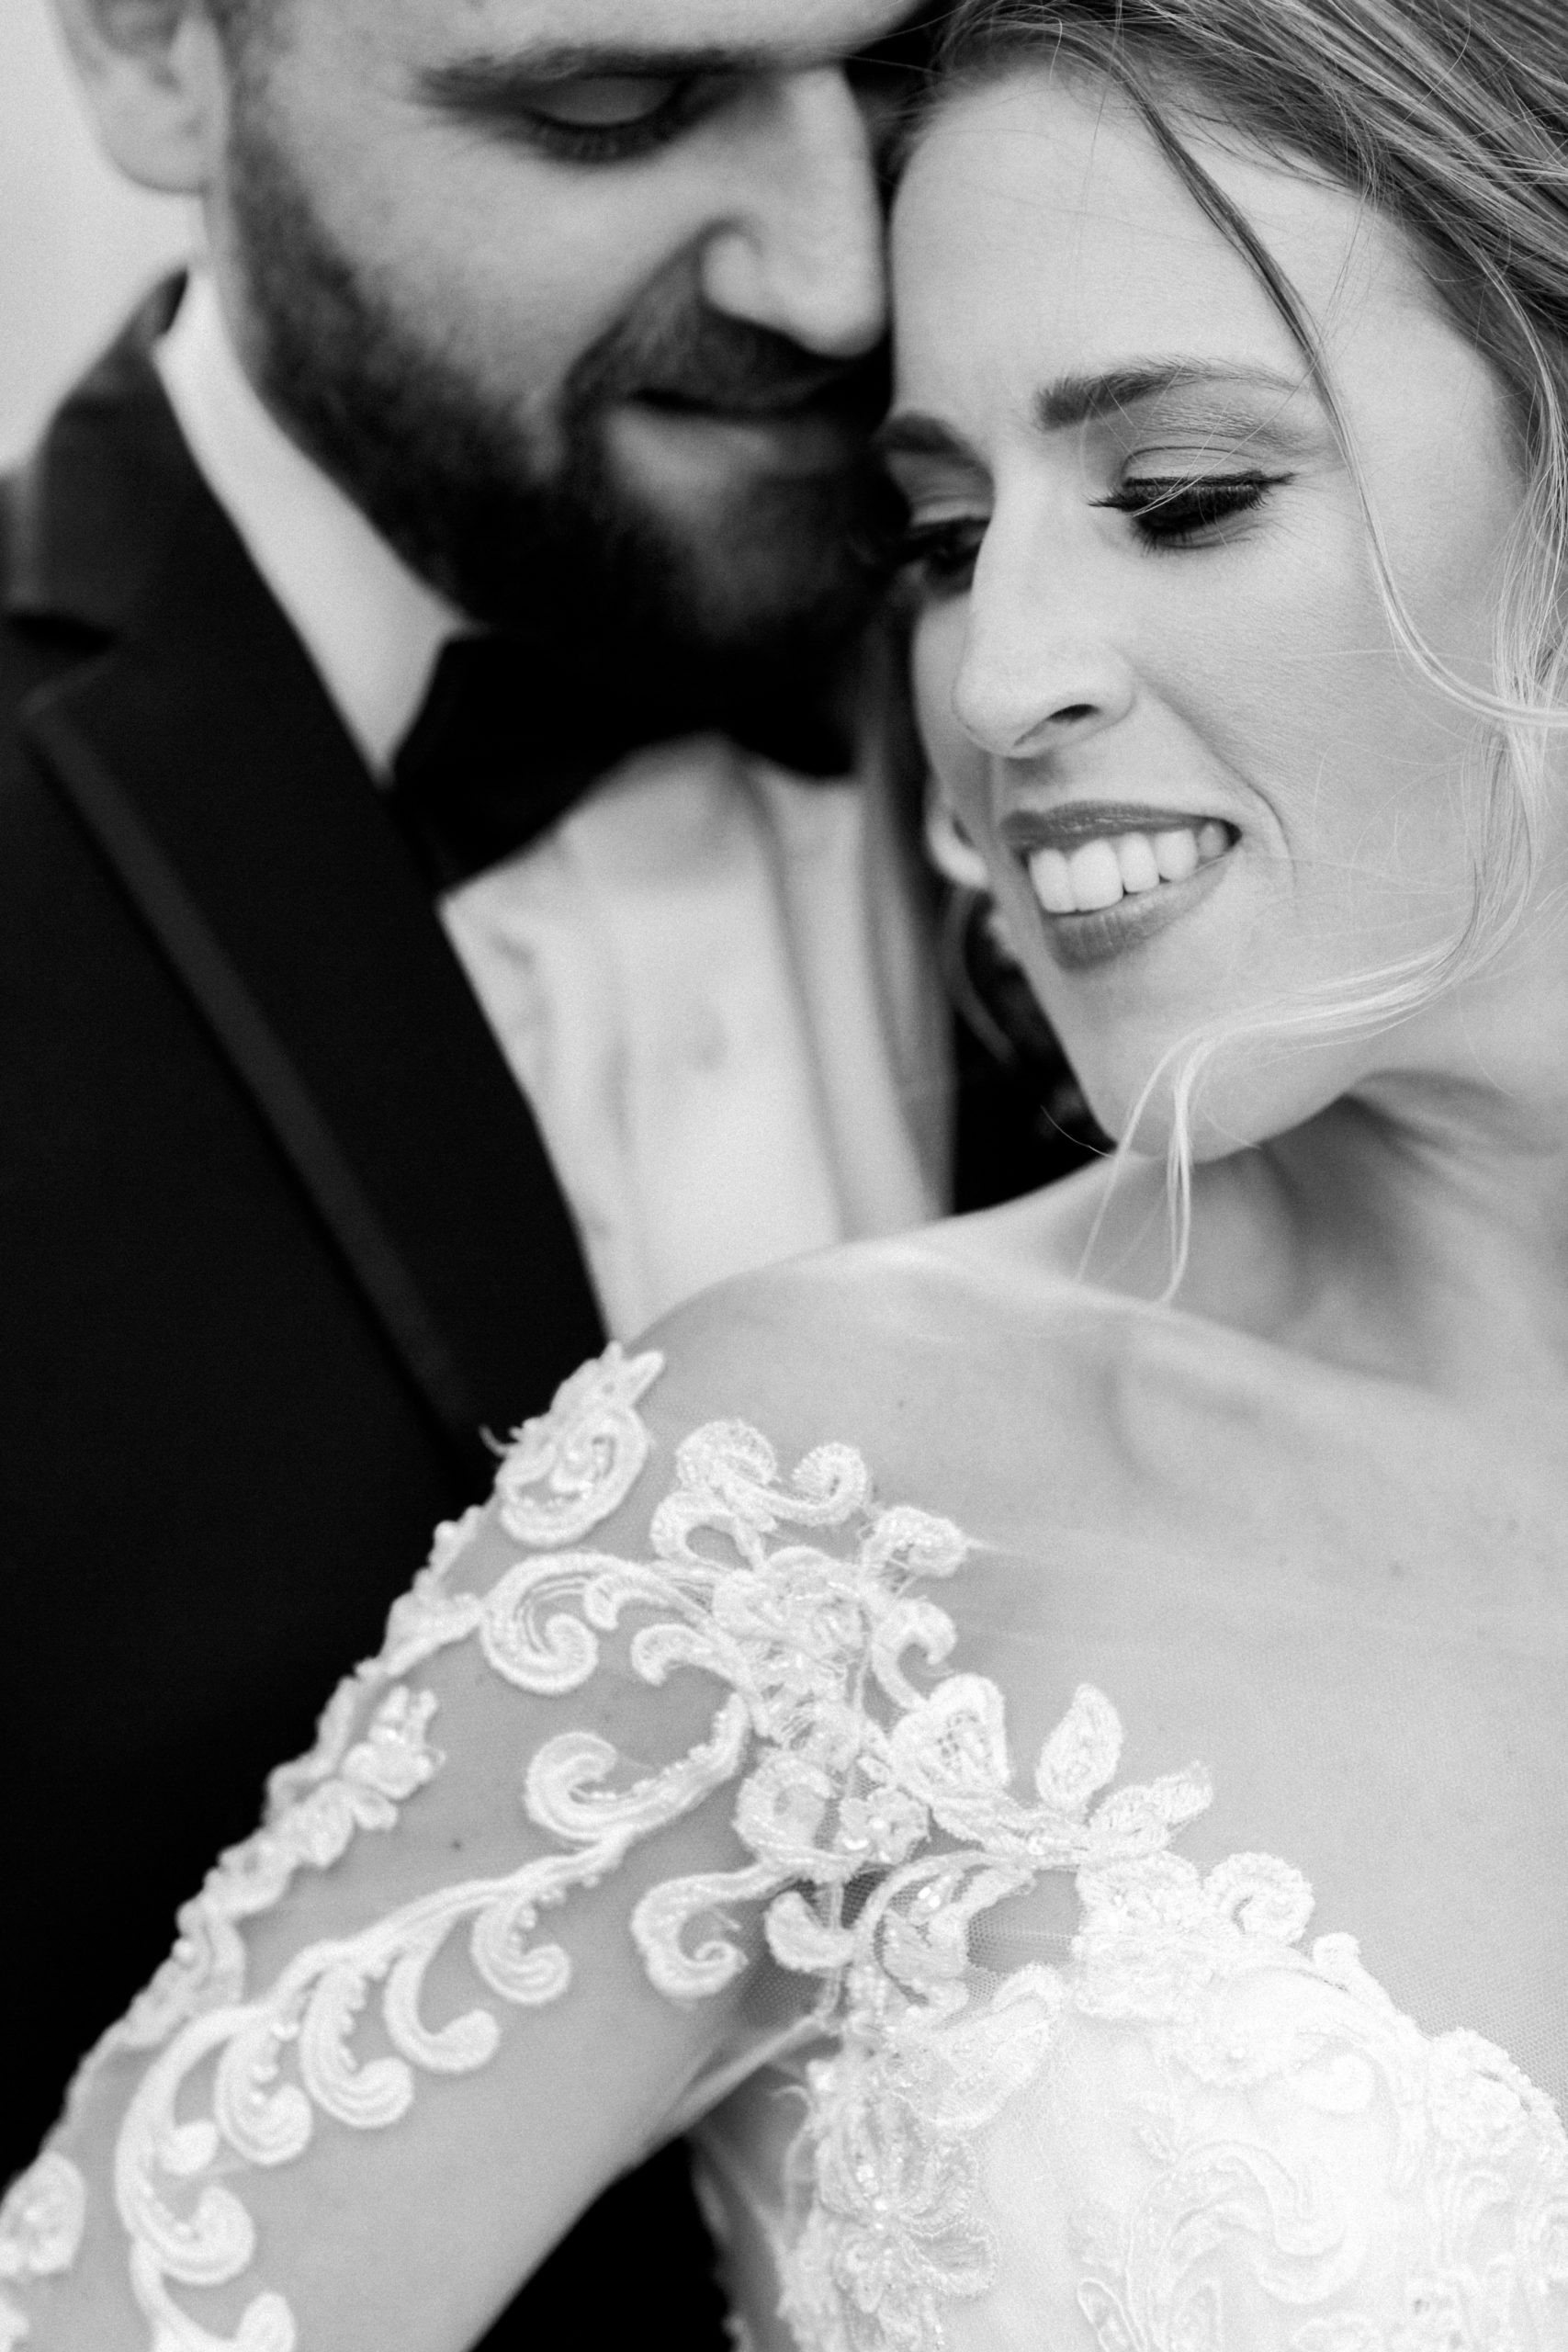 A spring wedding in Columbia, Missouri by Love Tree Studios